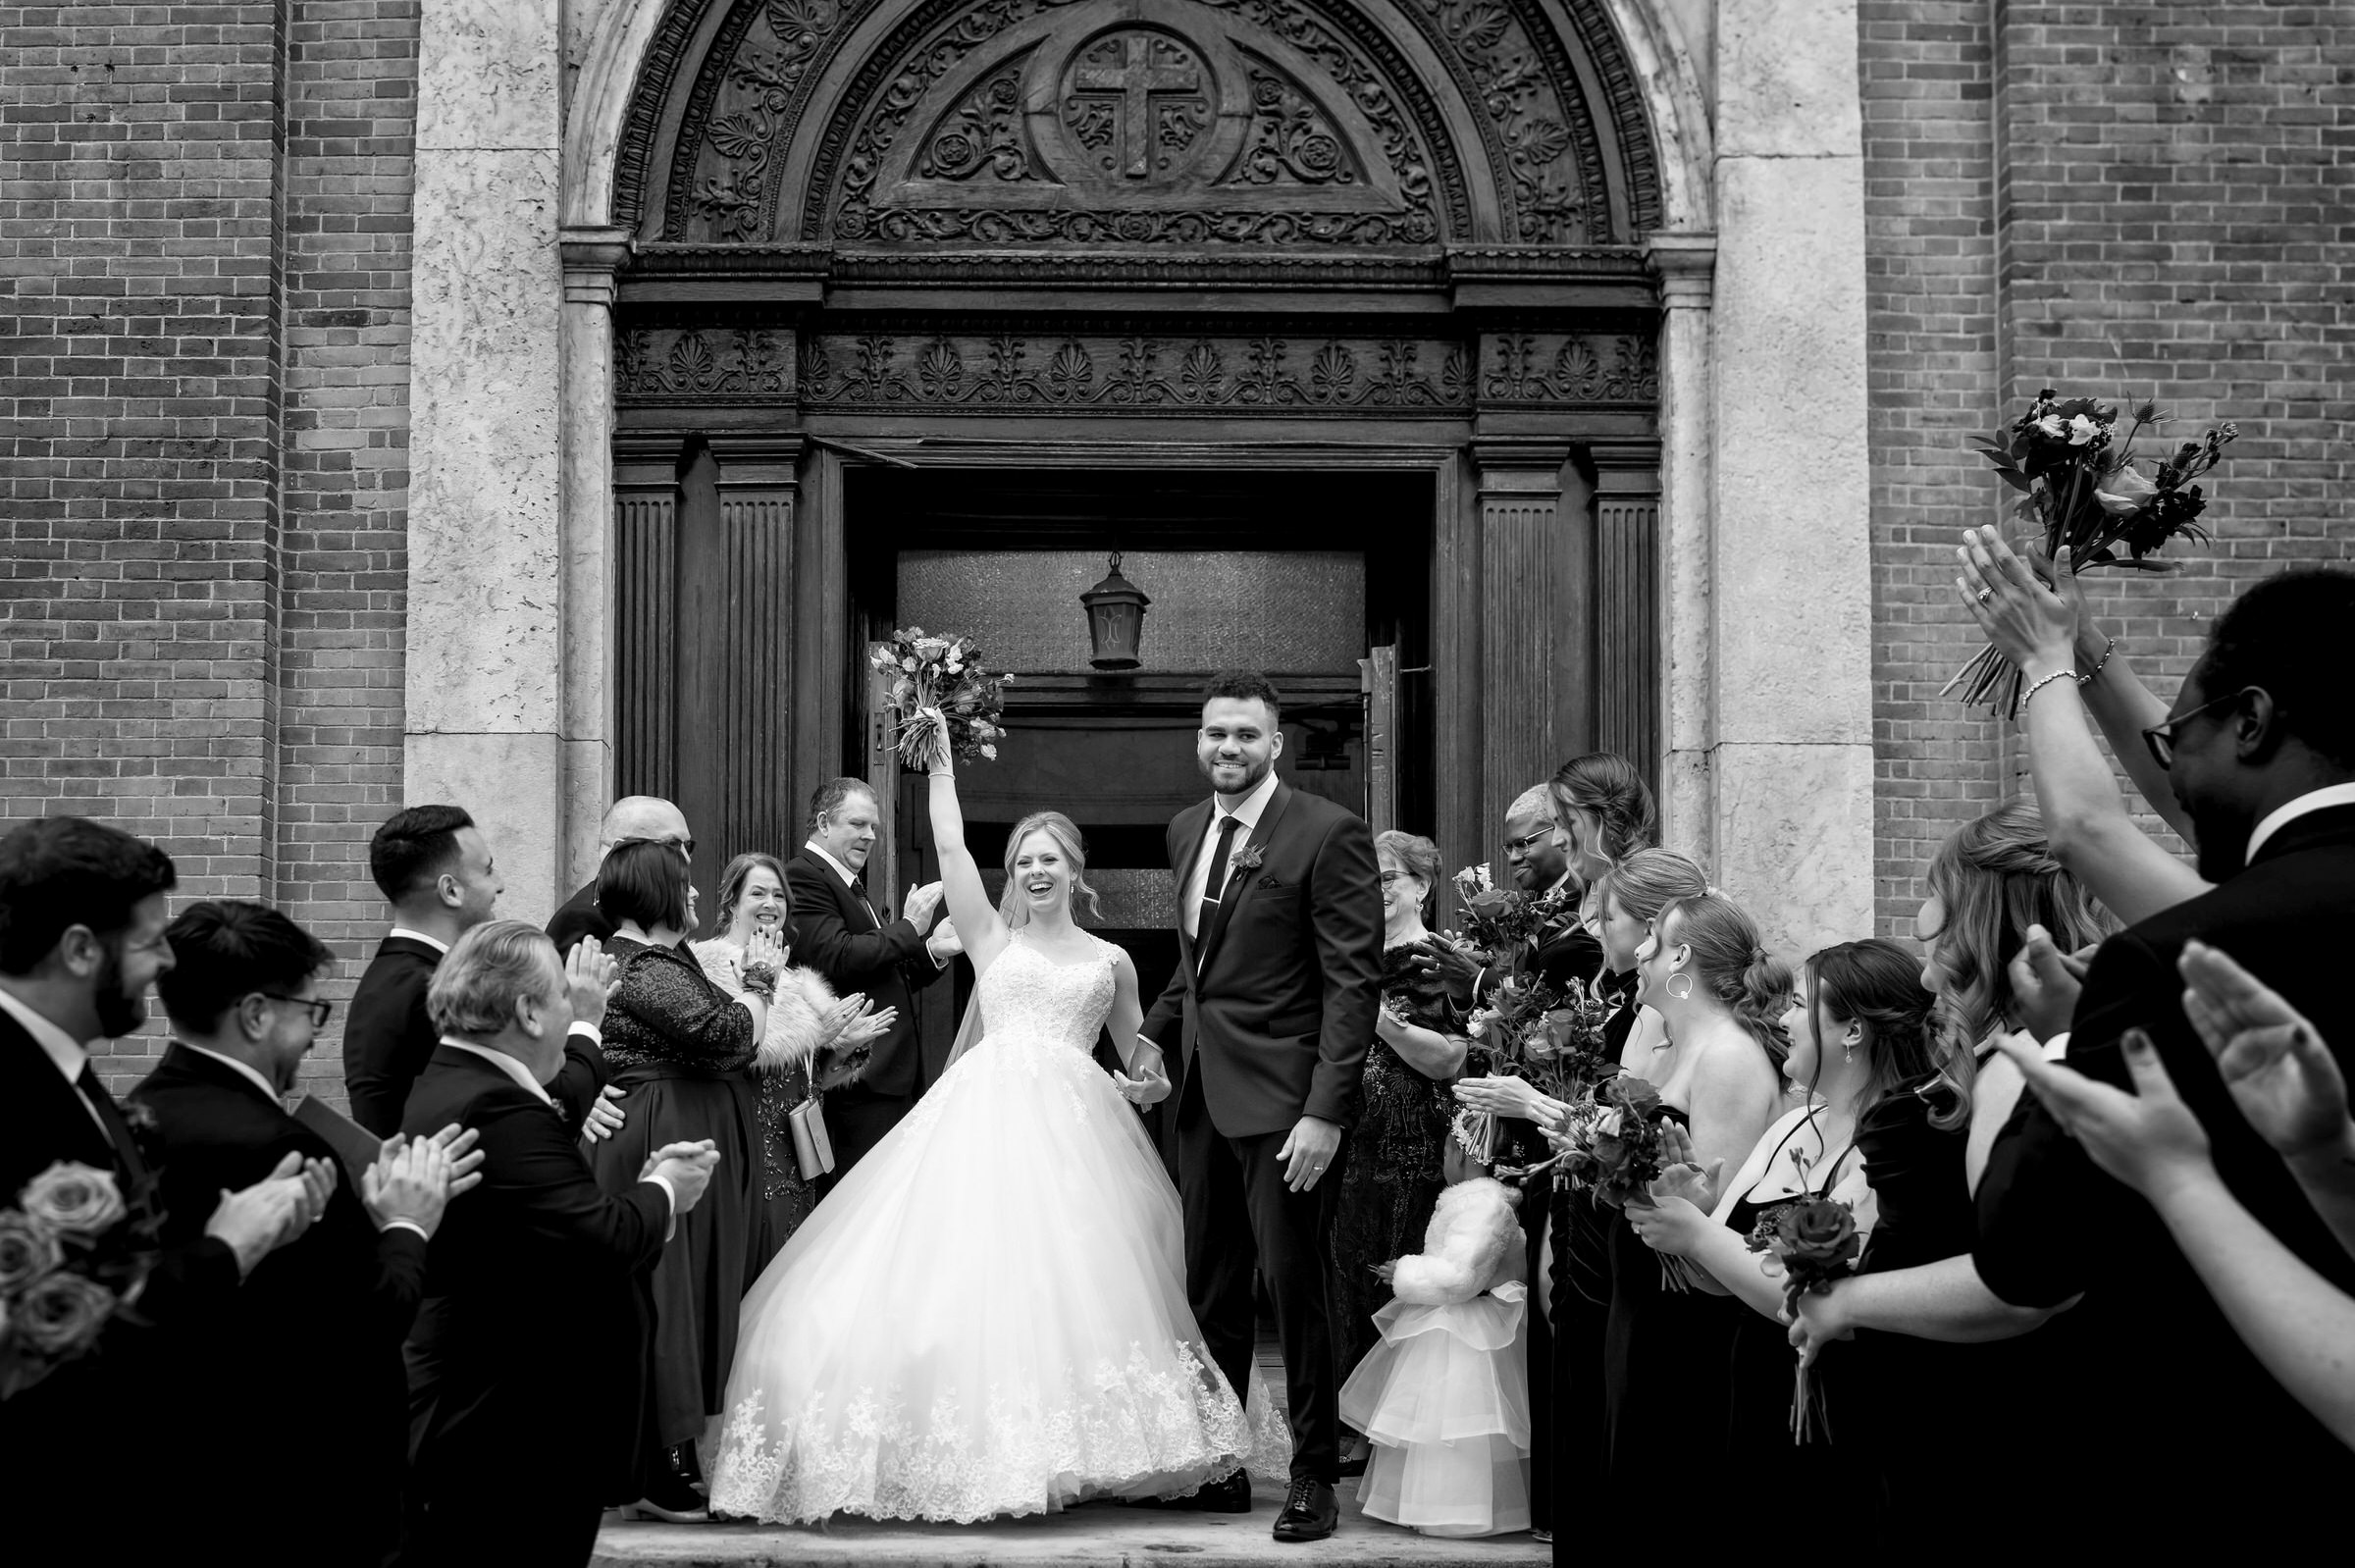 A wedding day grand exit at Saints Peter and Paul Jesuit Church in Detroit.